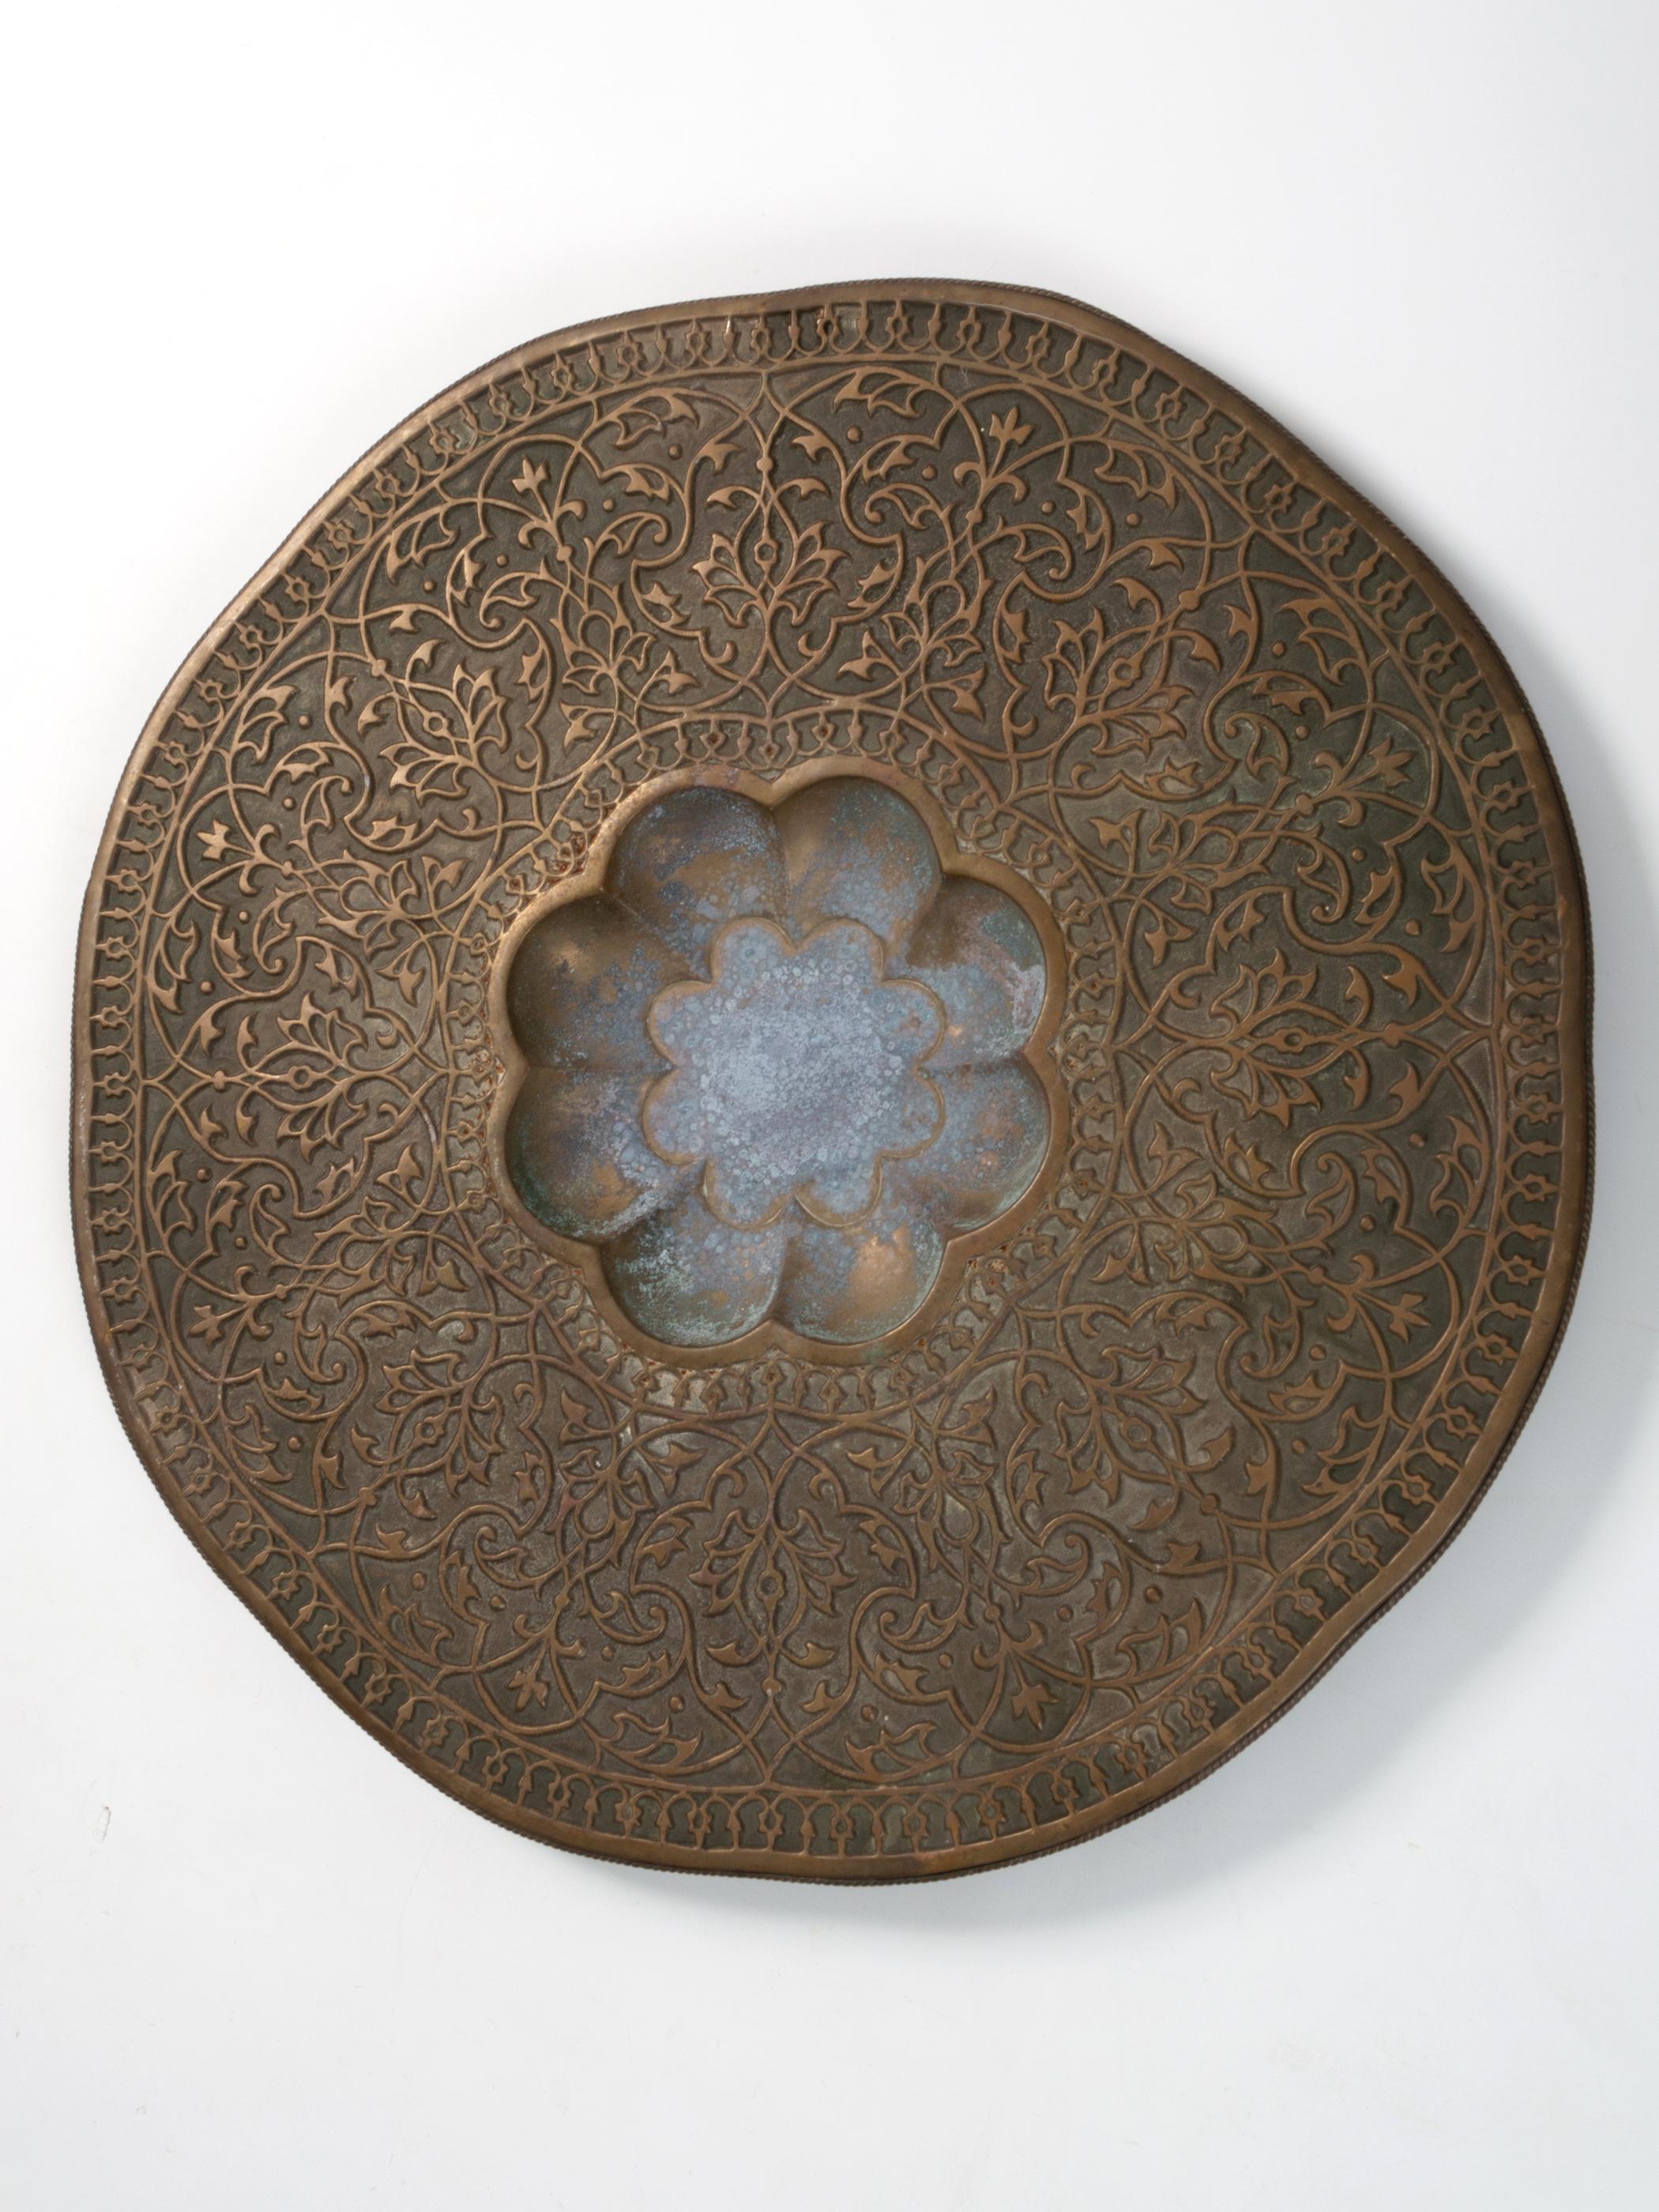 A Large 19th Century Turkish Brass Copper Wall Charger C.1850.
Beautifully hand engraved stylised floral motifs with attractive patination to the coppered brass.

Could be used as an ornate serving platter

In good condition with expected signs